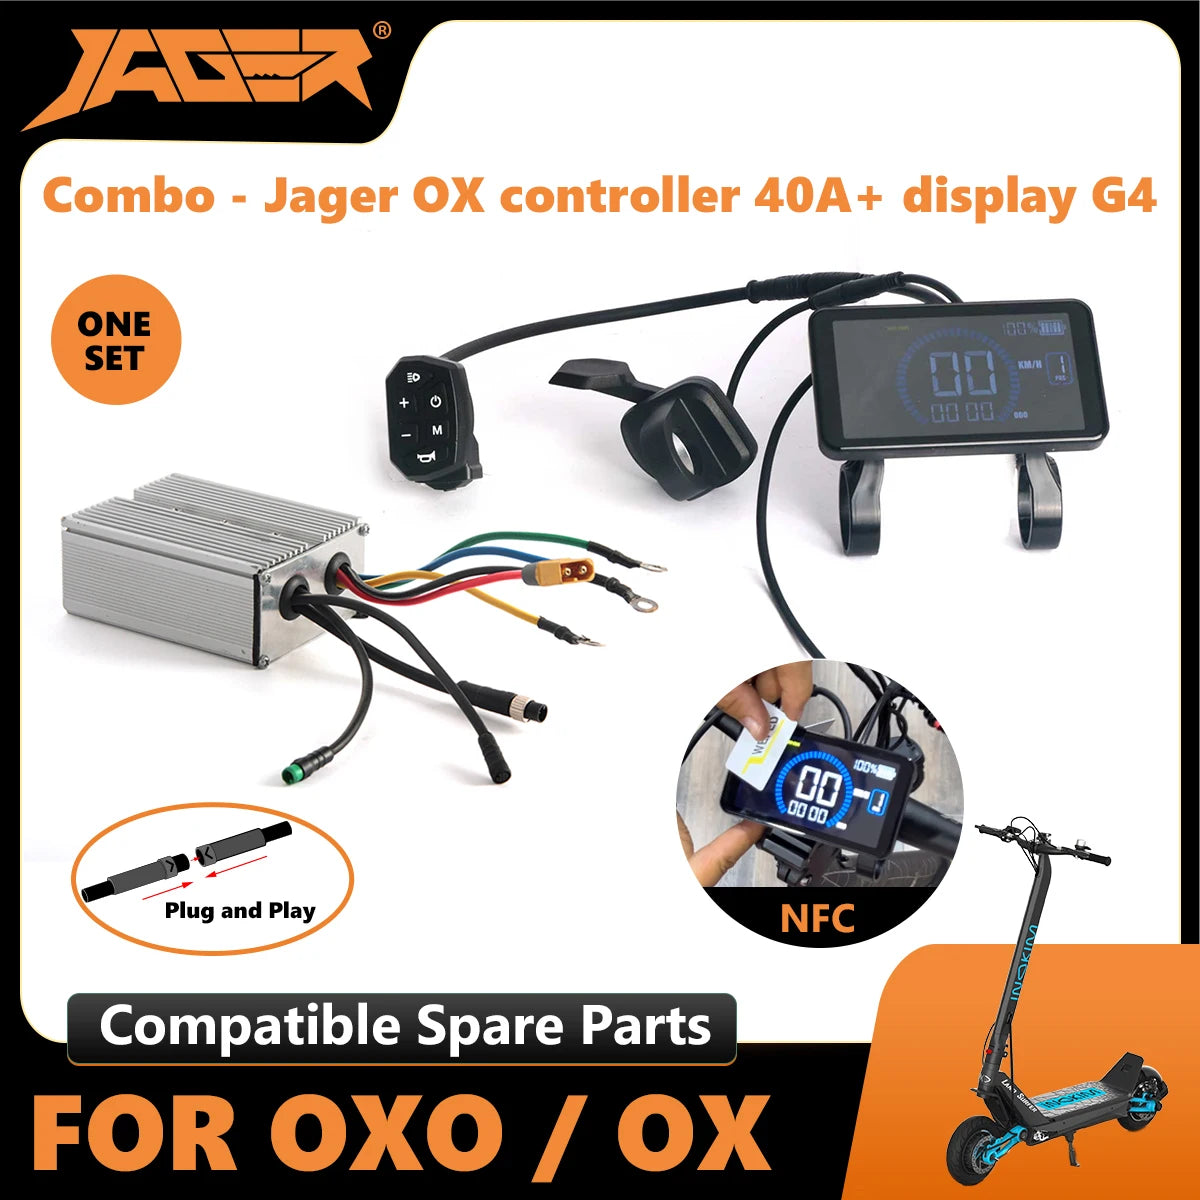 Combo-Jager OX Controller 40A with Jager Display generation 4 inokim parts accessories